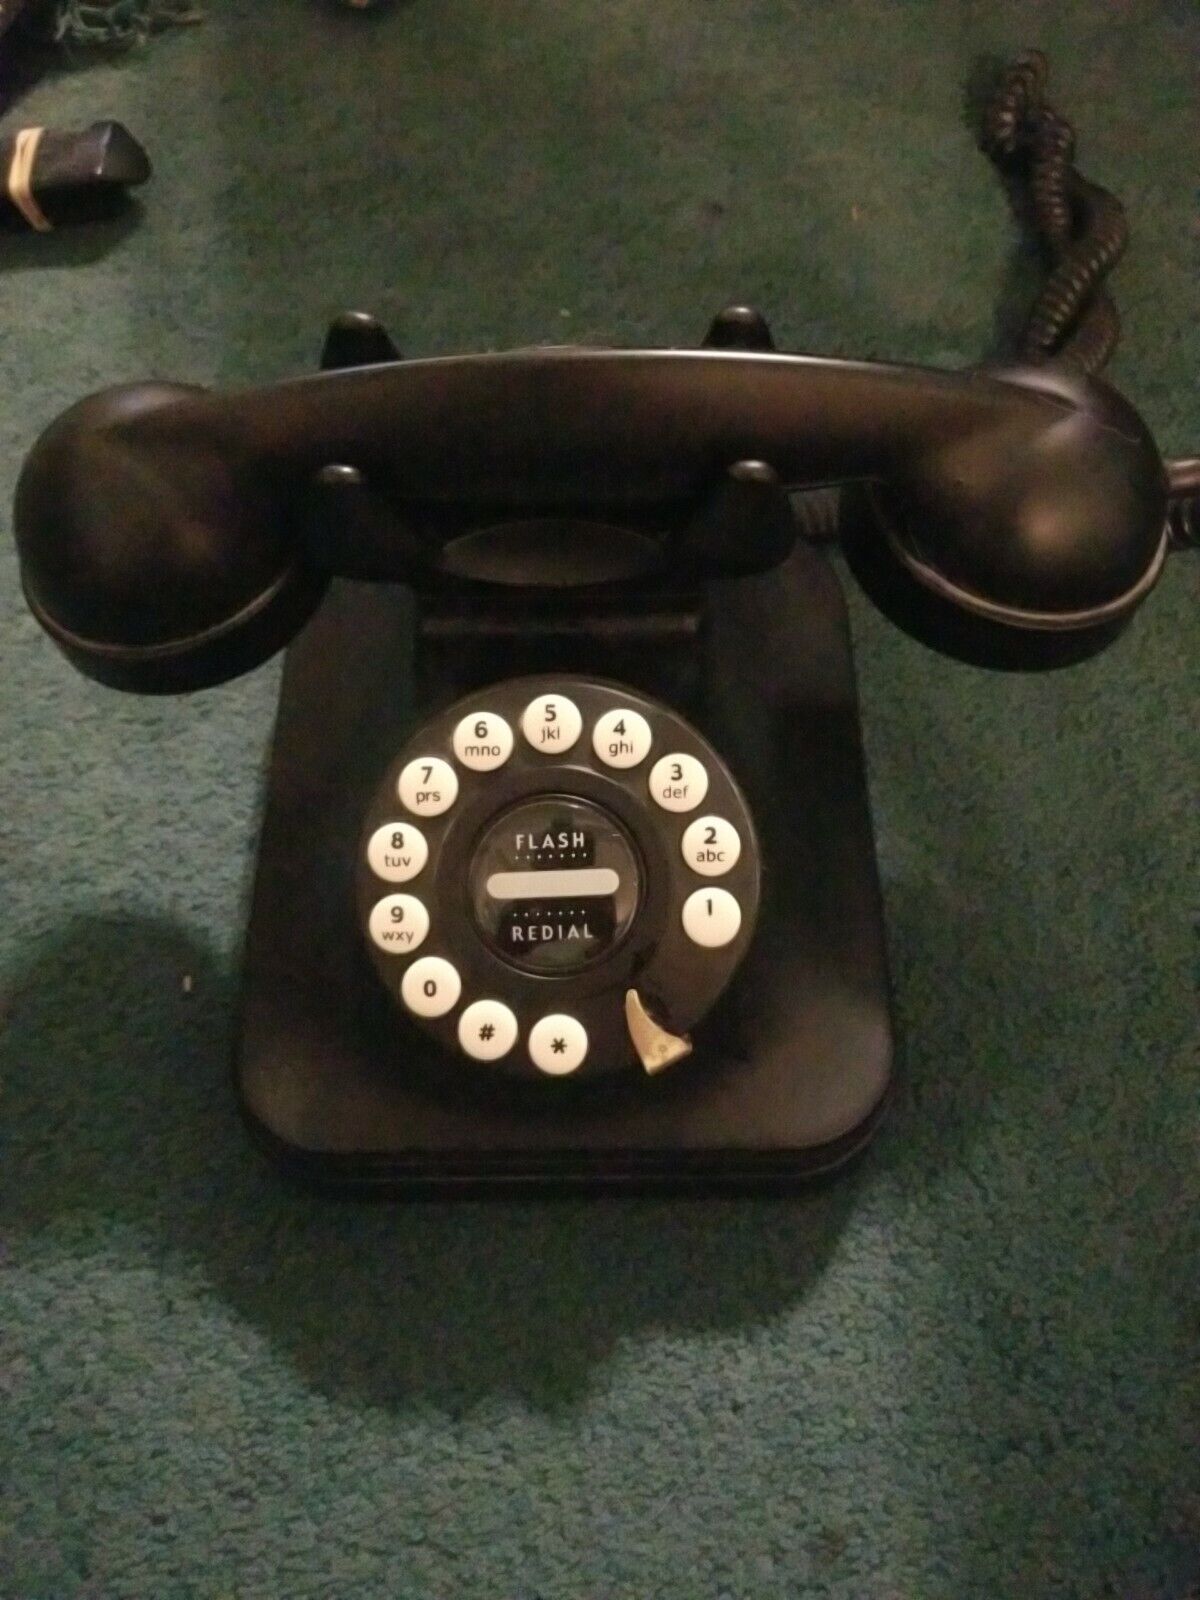 Grand Phone Vintage Black Touch Button Flash Redial Retro 1950's Telephone